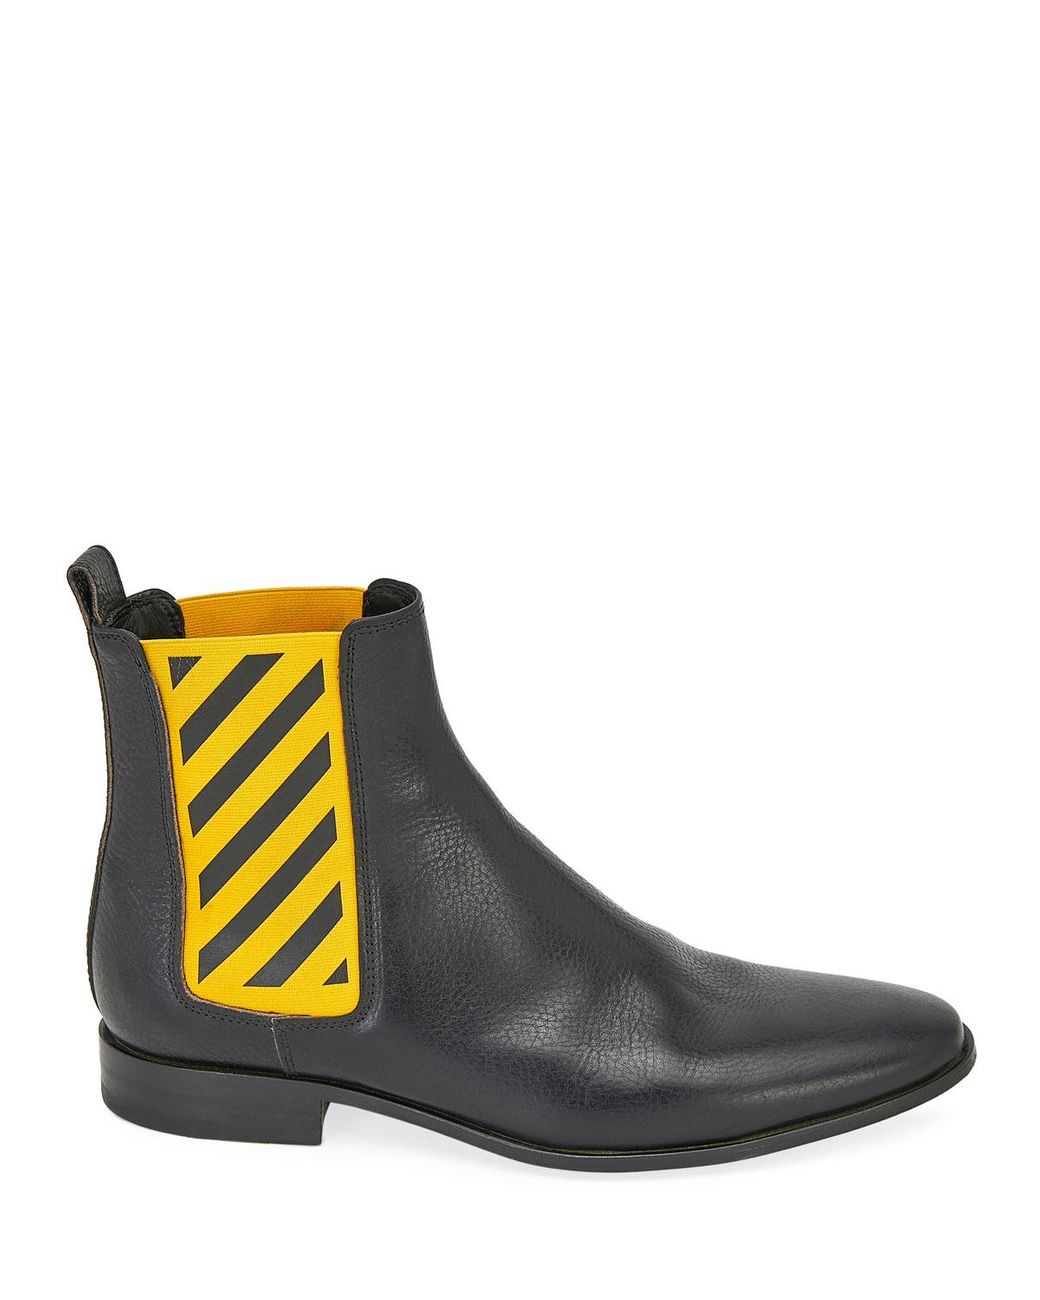 Off-White c/o Virgil Abloh Leather Black And Yellow Chelsea Boots ...